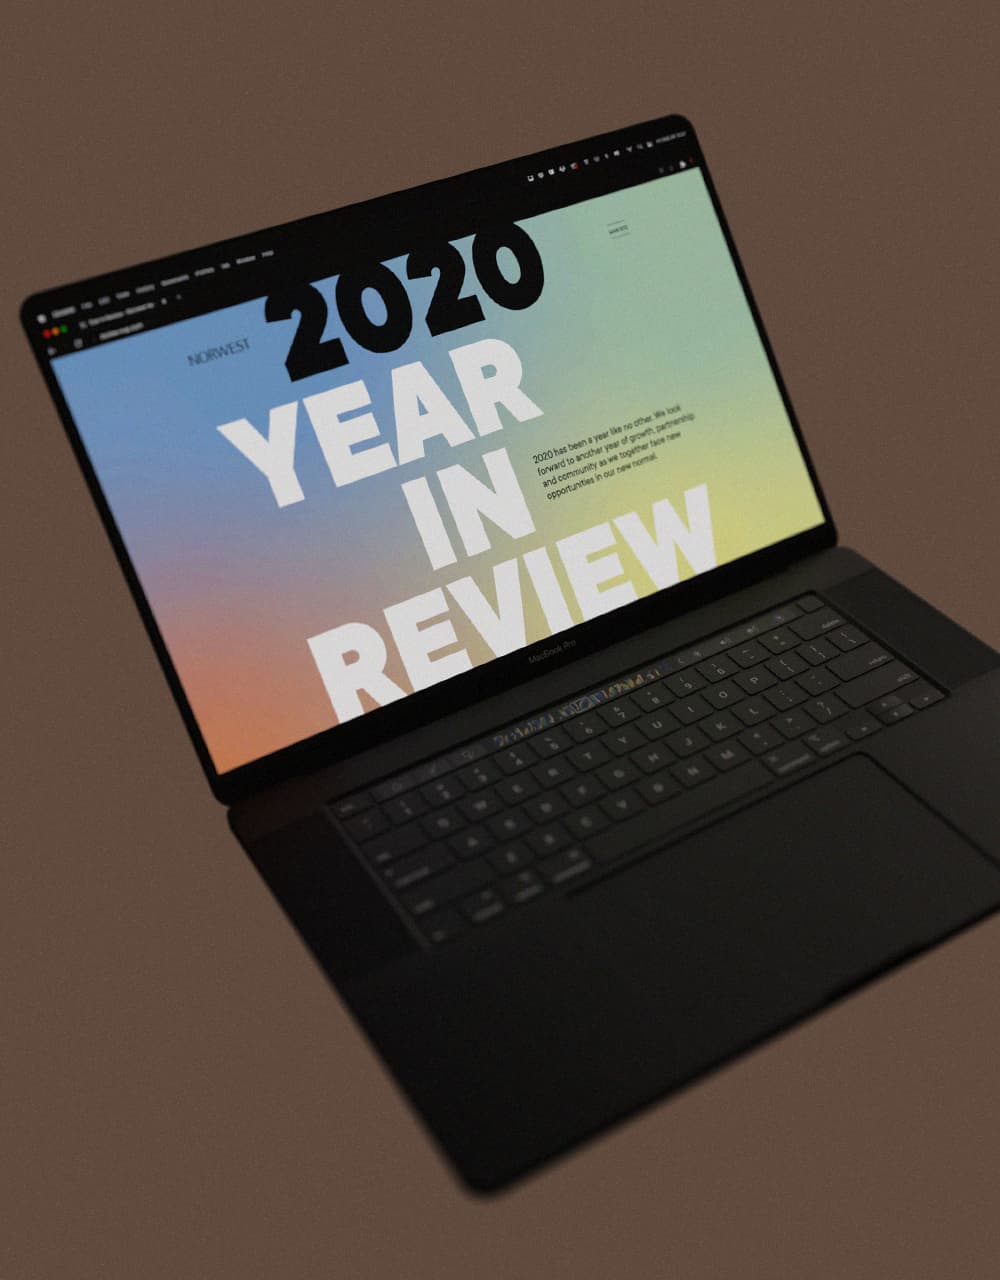 A 3D rendering of a computer with the NVP 2020 Year in Review webpage